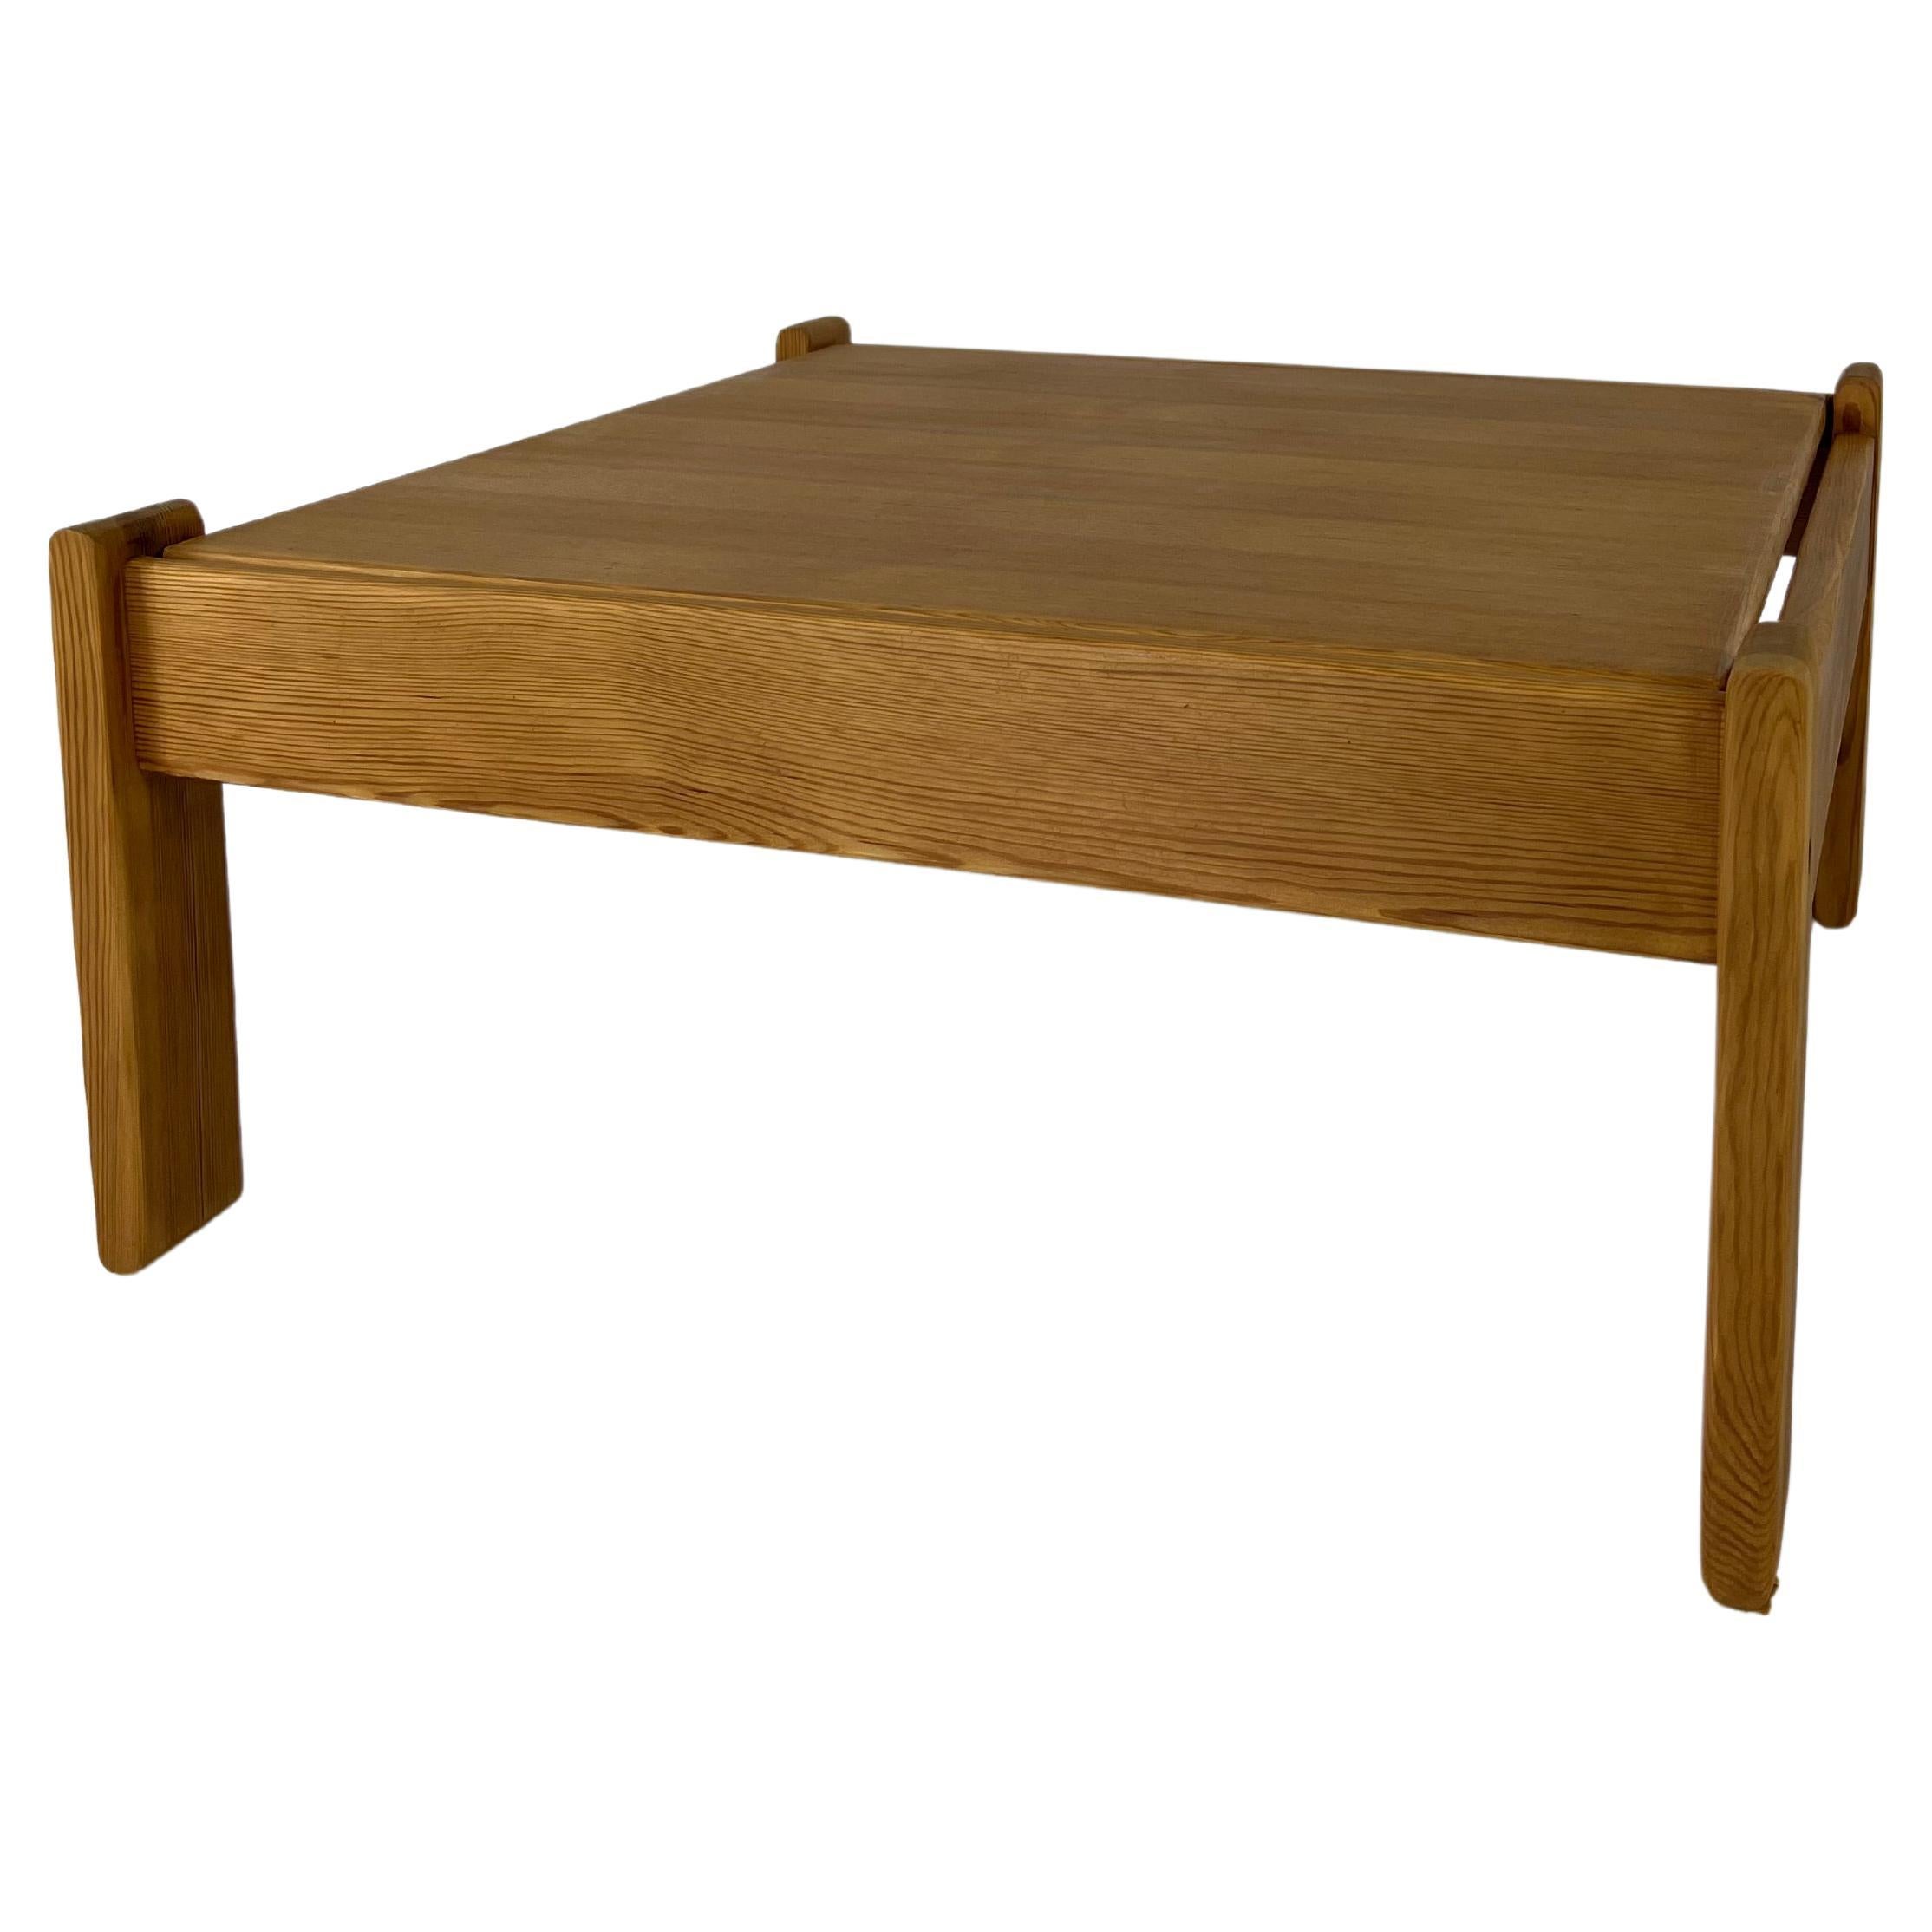 Two-Sided Modernist Coffee Table in Pine Wood, 1970s For Sale